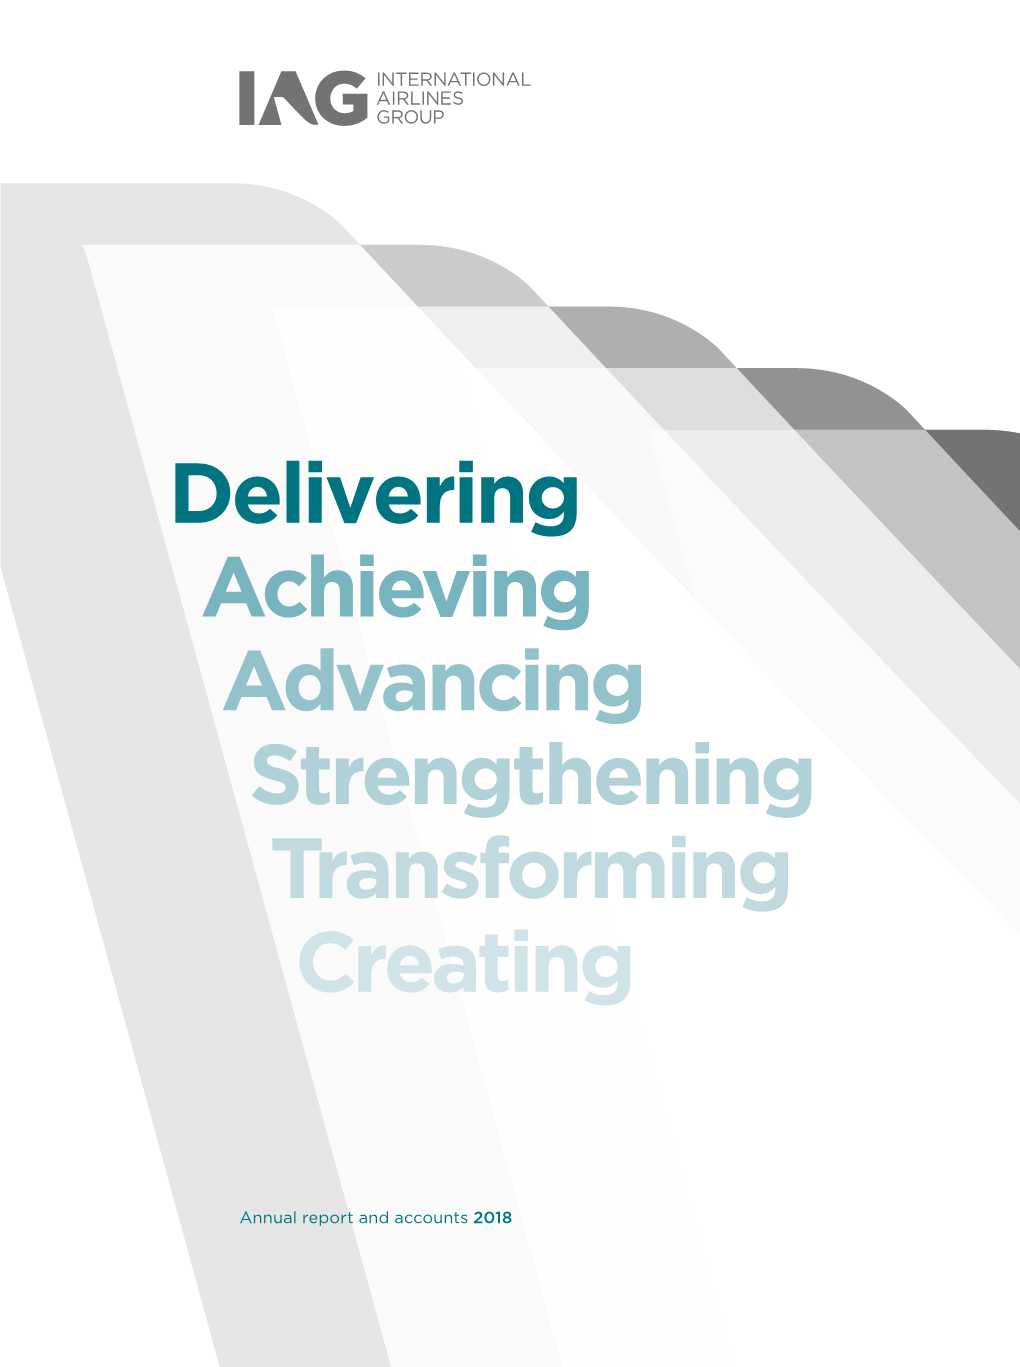 Delivering Achieving Advancing Strengthening Transforming Creating